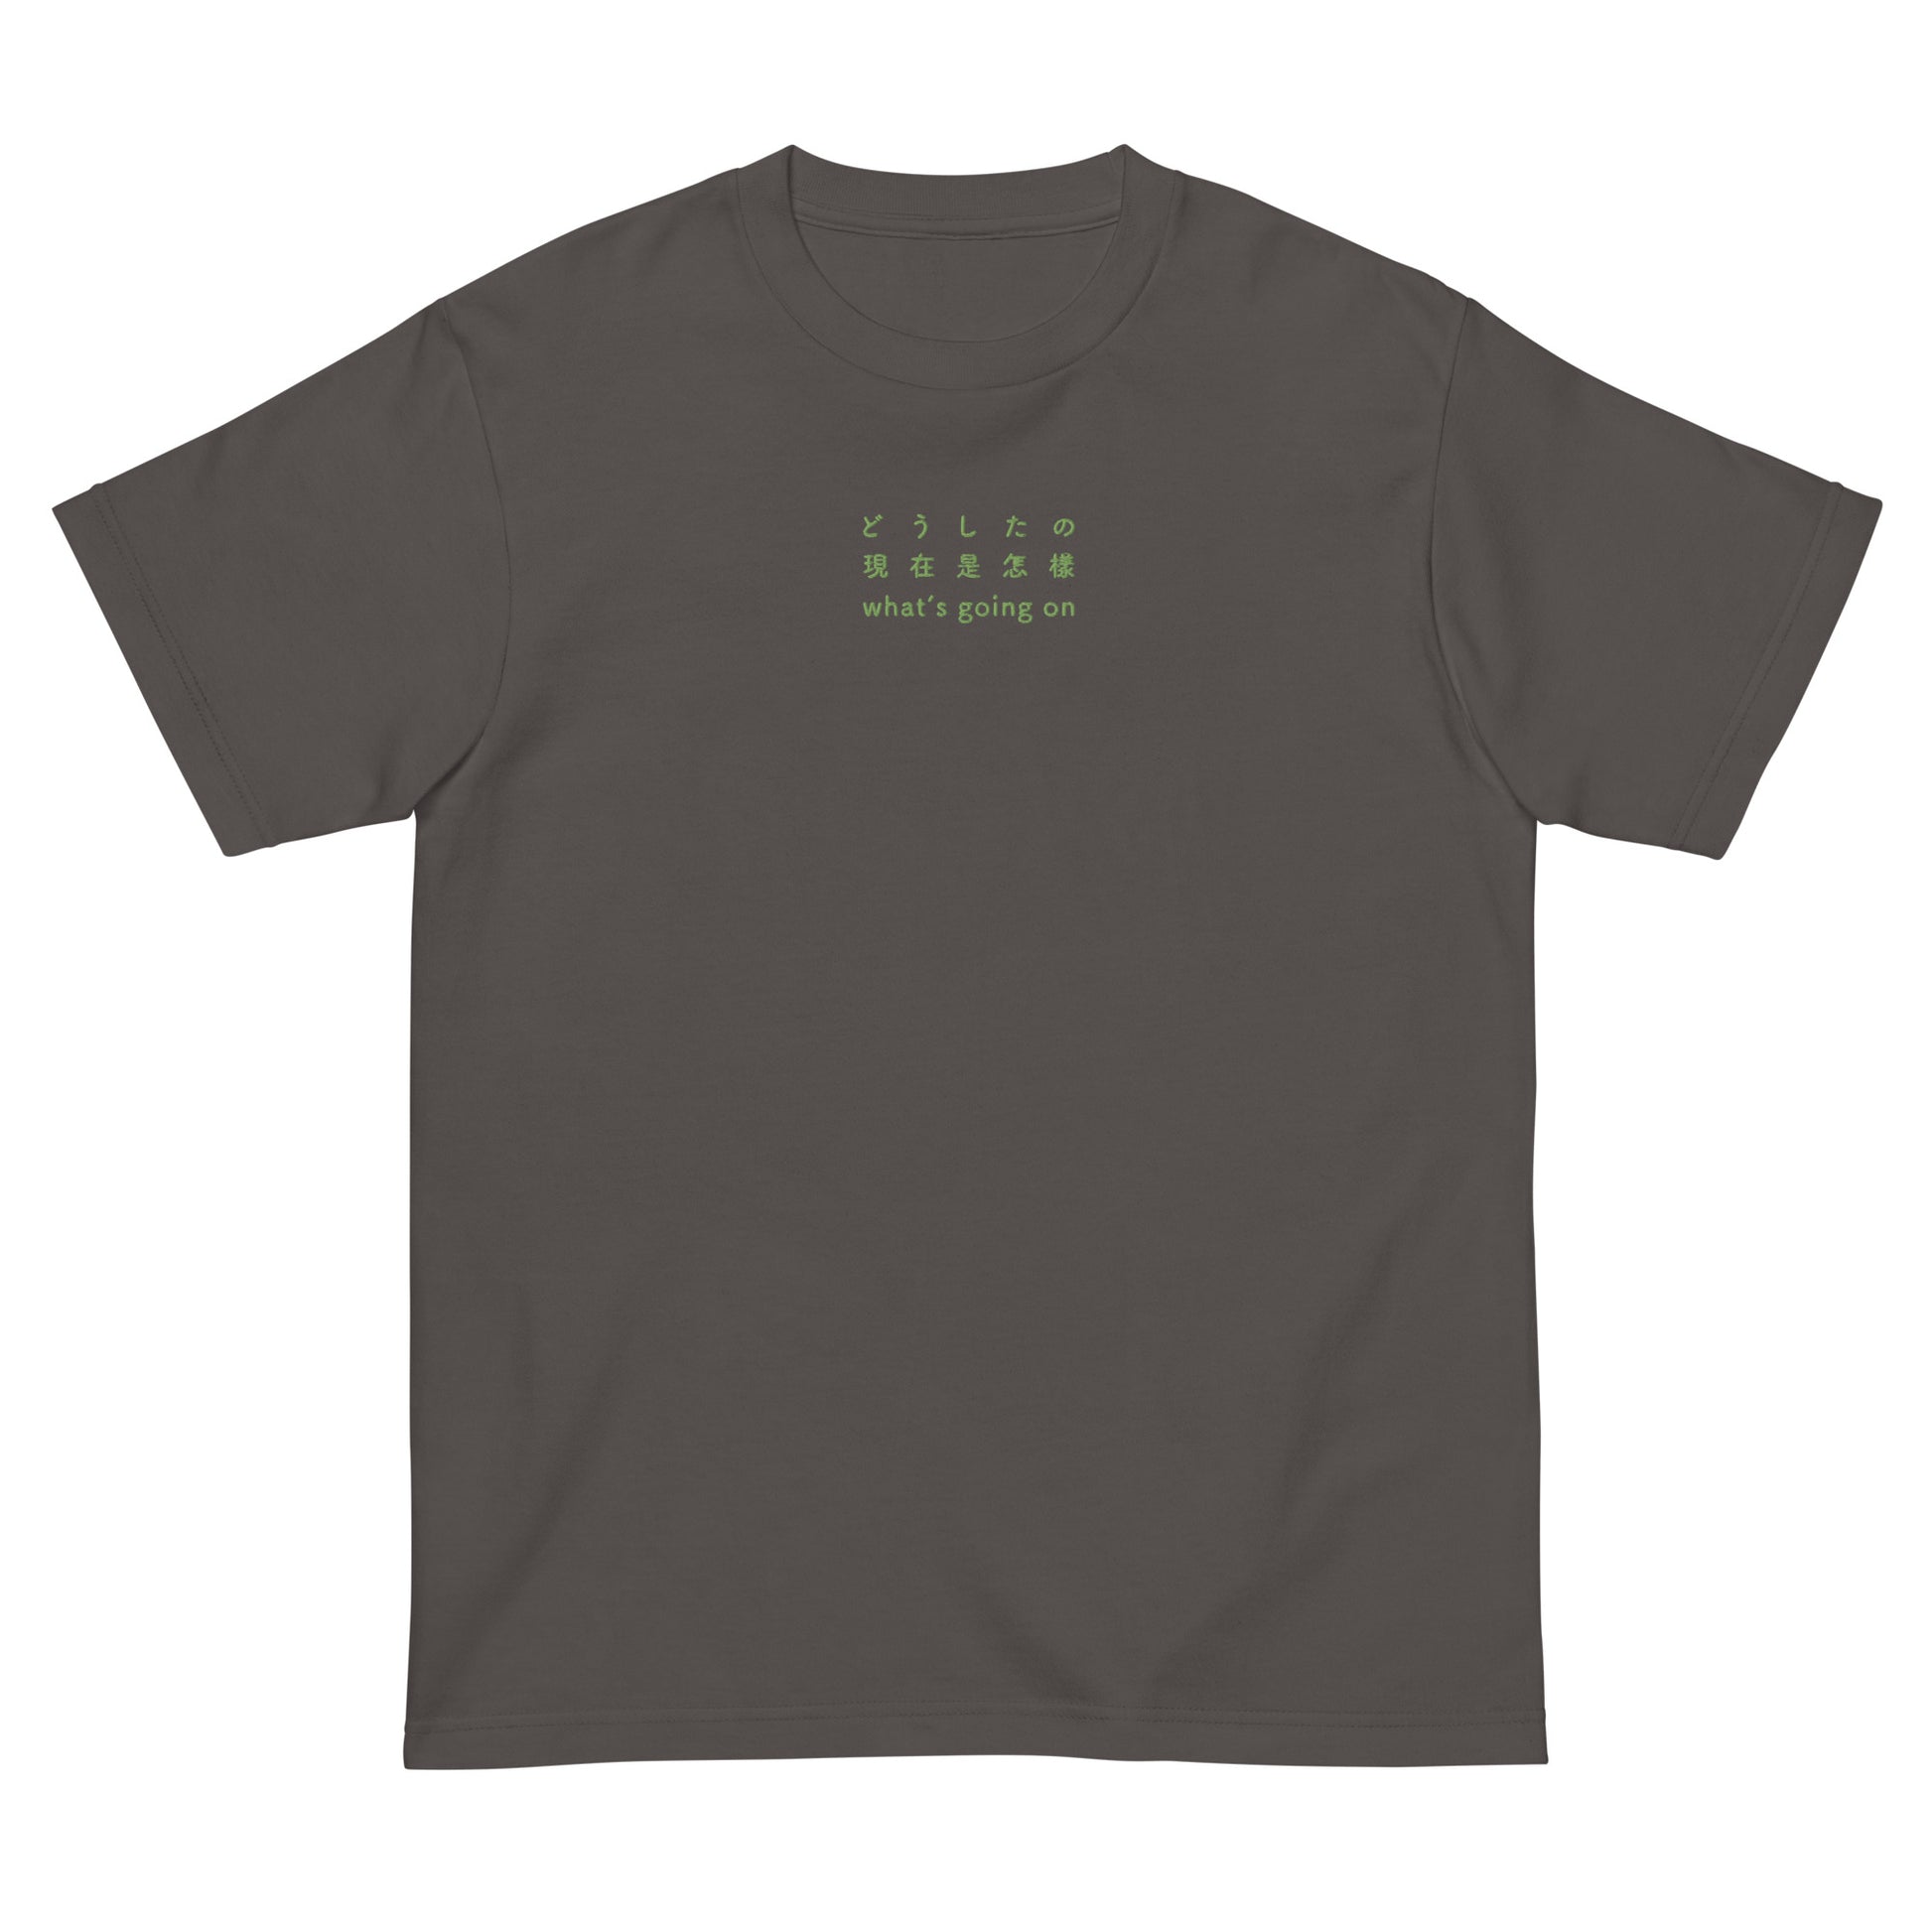 Dark Gray High Quality Tee - Front Design with an Green Embroidery "What's going on" in Japanese,Chinese and English